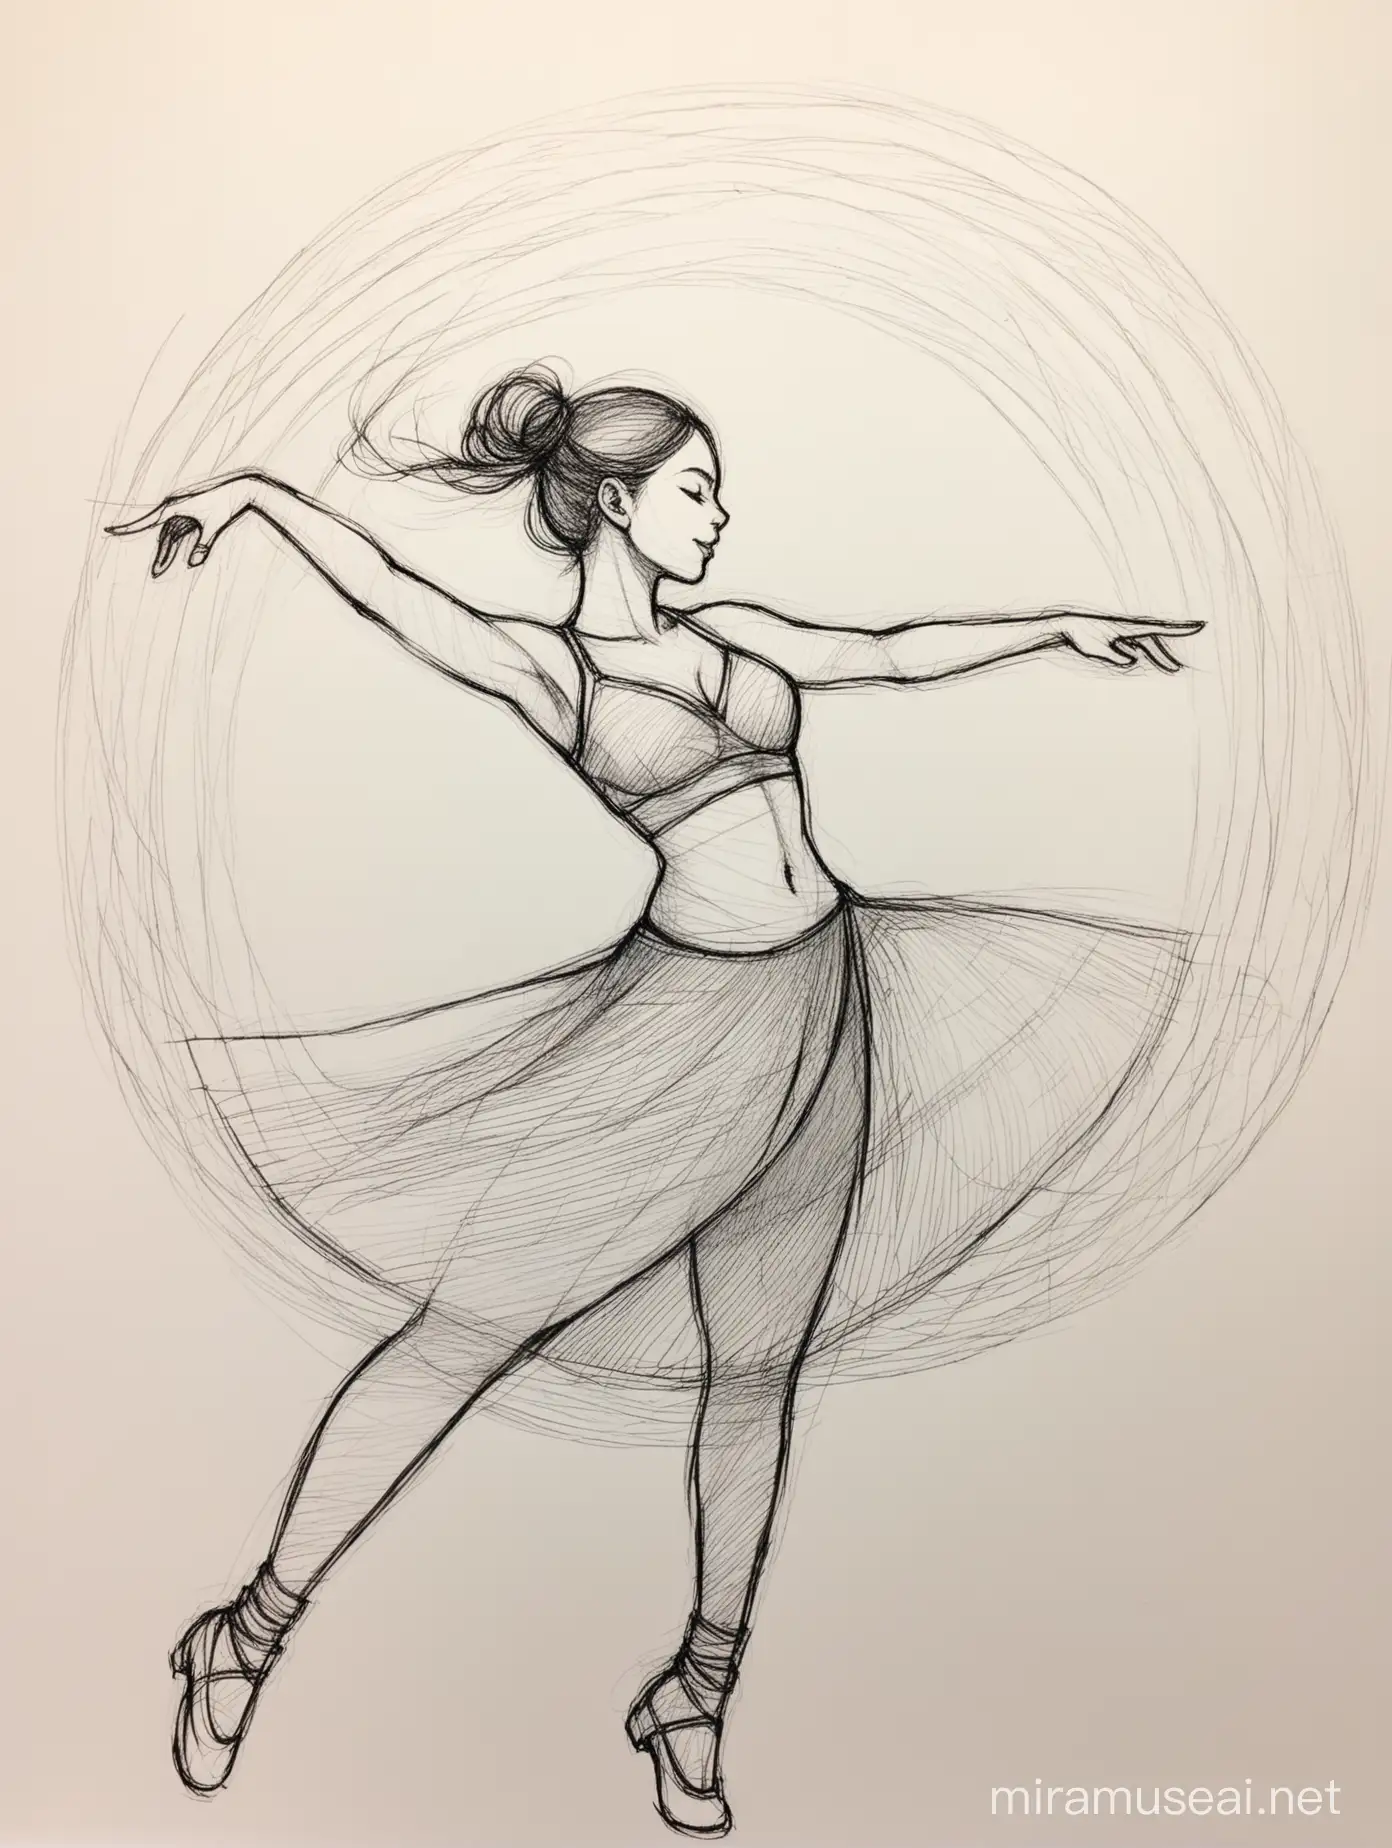 Multisensory Artistic Fusion Dance Music and Drawing Harmony